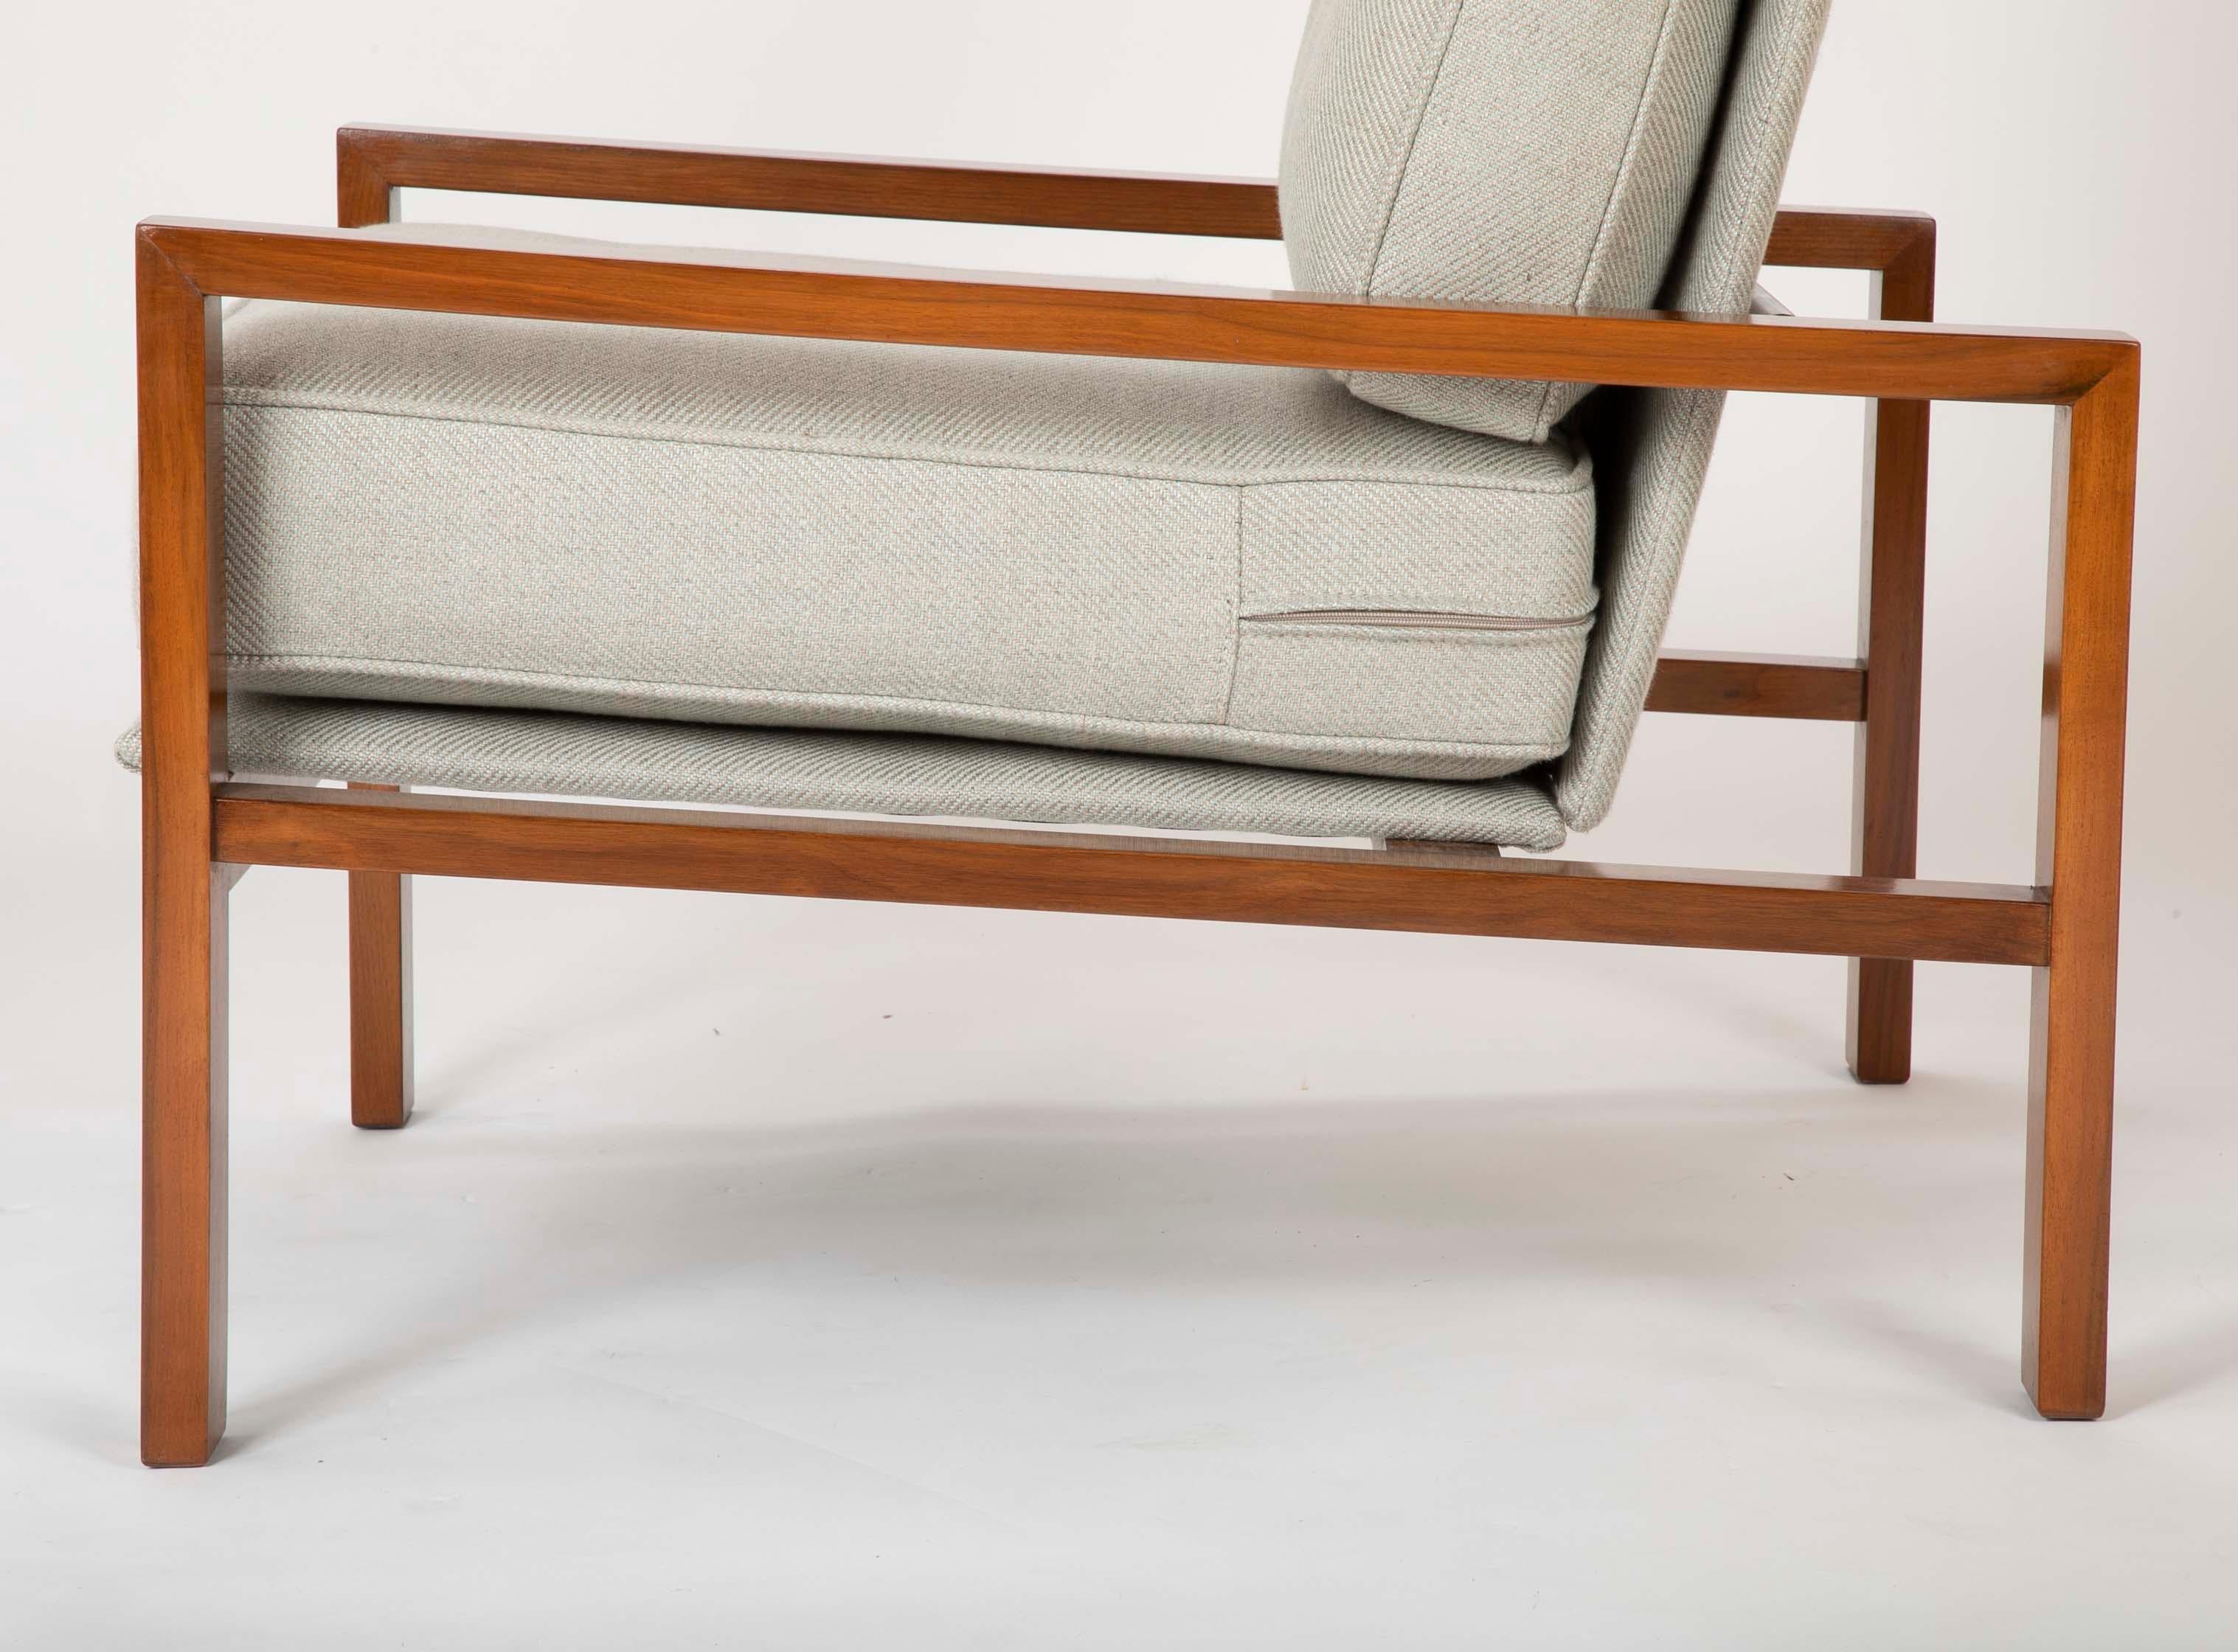 Prototype Van Keppel and Green Lounge Chair with Great Provenance 1